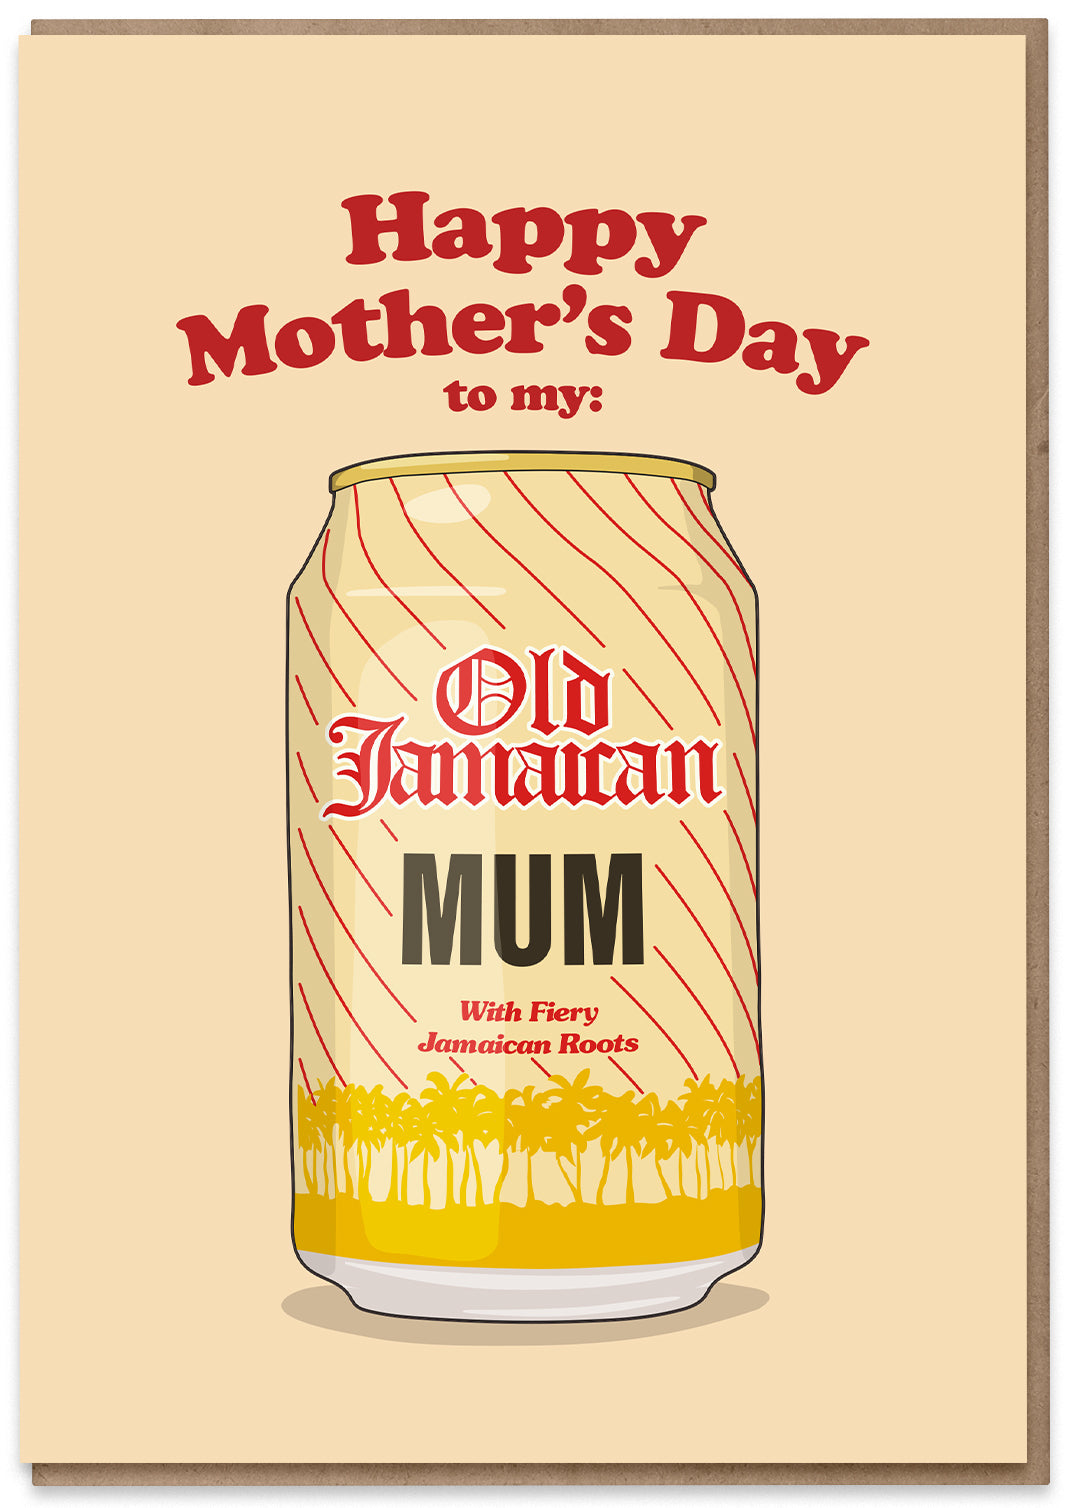 Old Jamaican Mum Mother's Day